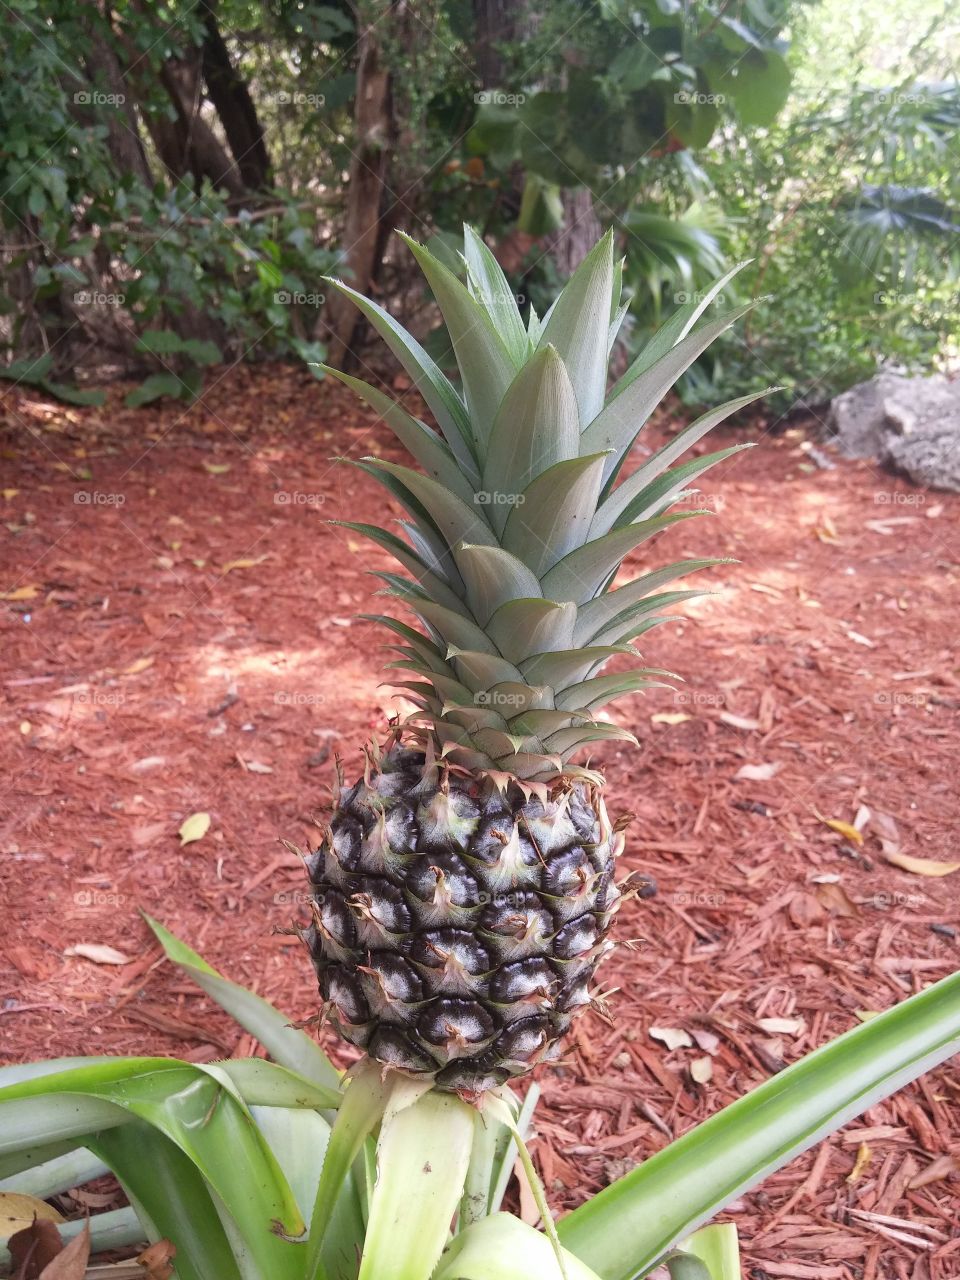 A pineapple I found growing during the last vacation I went on with my grandparents.